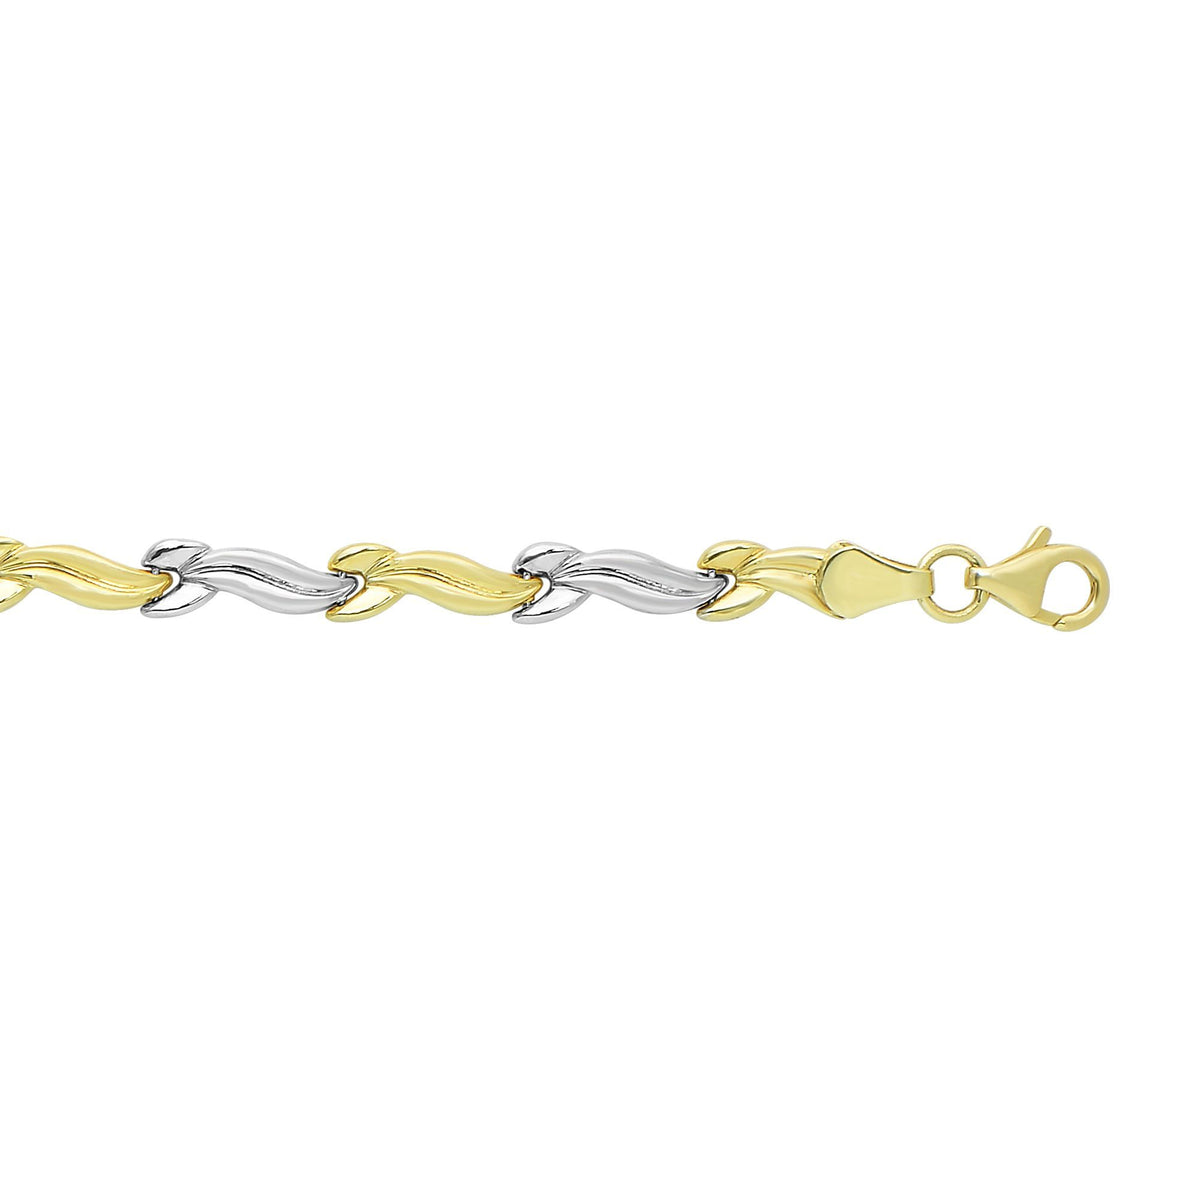 14k Yellow And White Gold Finish Wave Patterned Bracelet, 7,25" fine designer jewelry for men and women